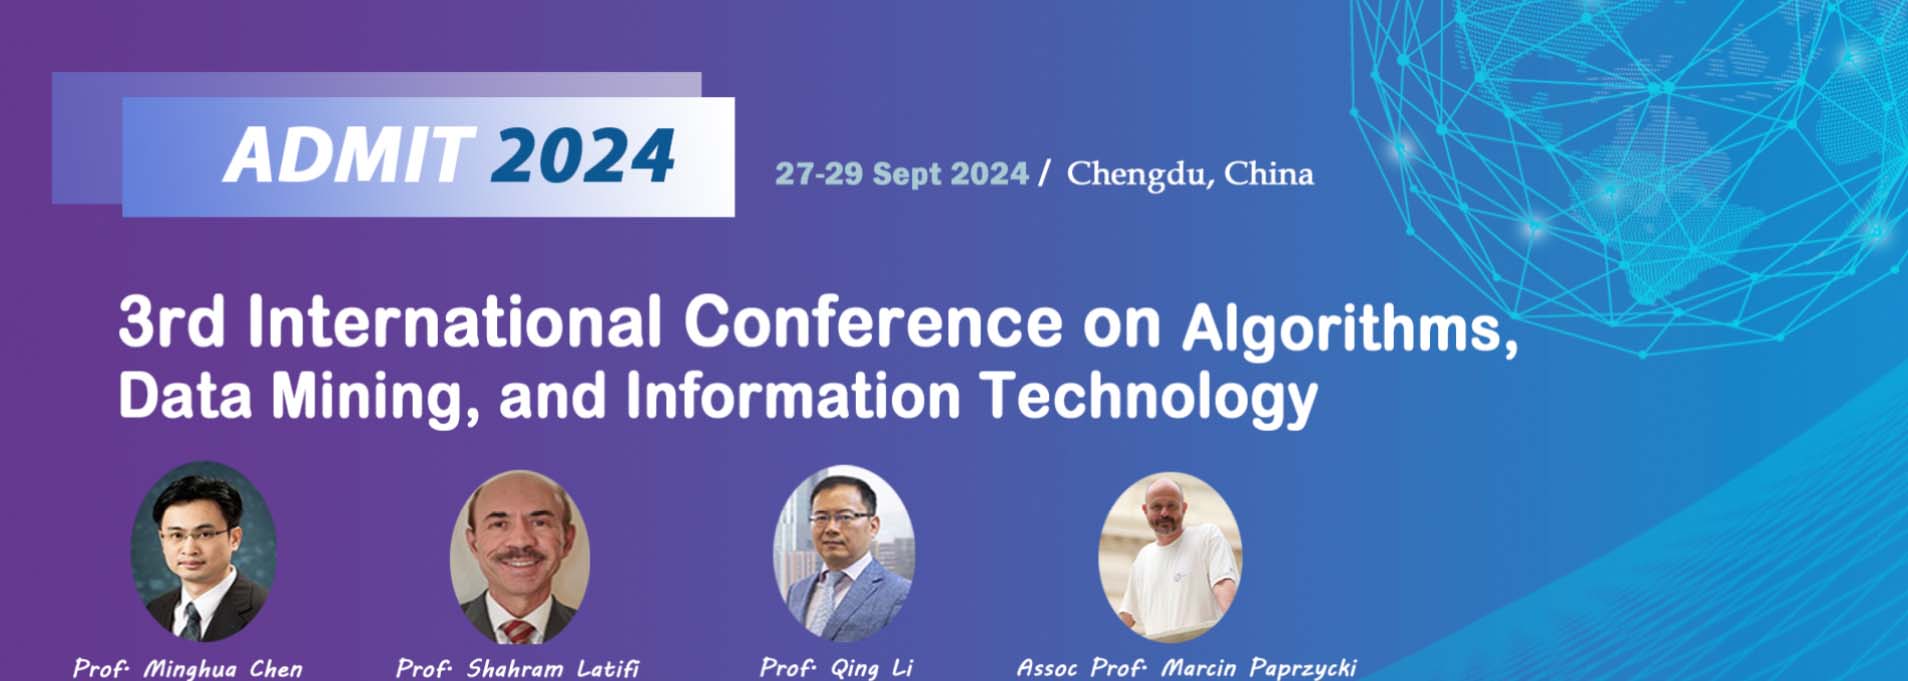 2024 3rd International Conference on Algorithms, Data Mining, and Information Technology (ADMIT 2024), CHENGDU, Sichuan, China